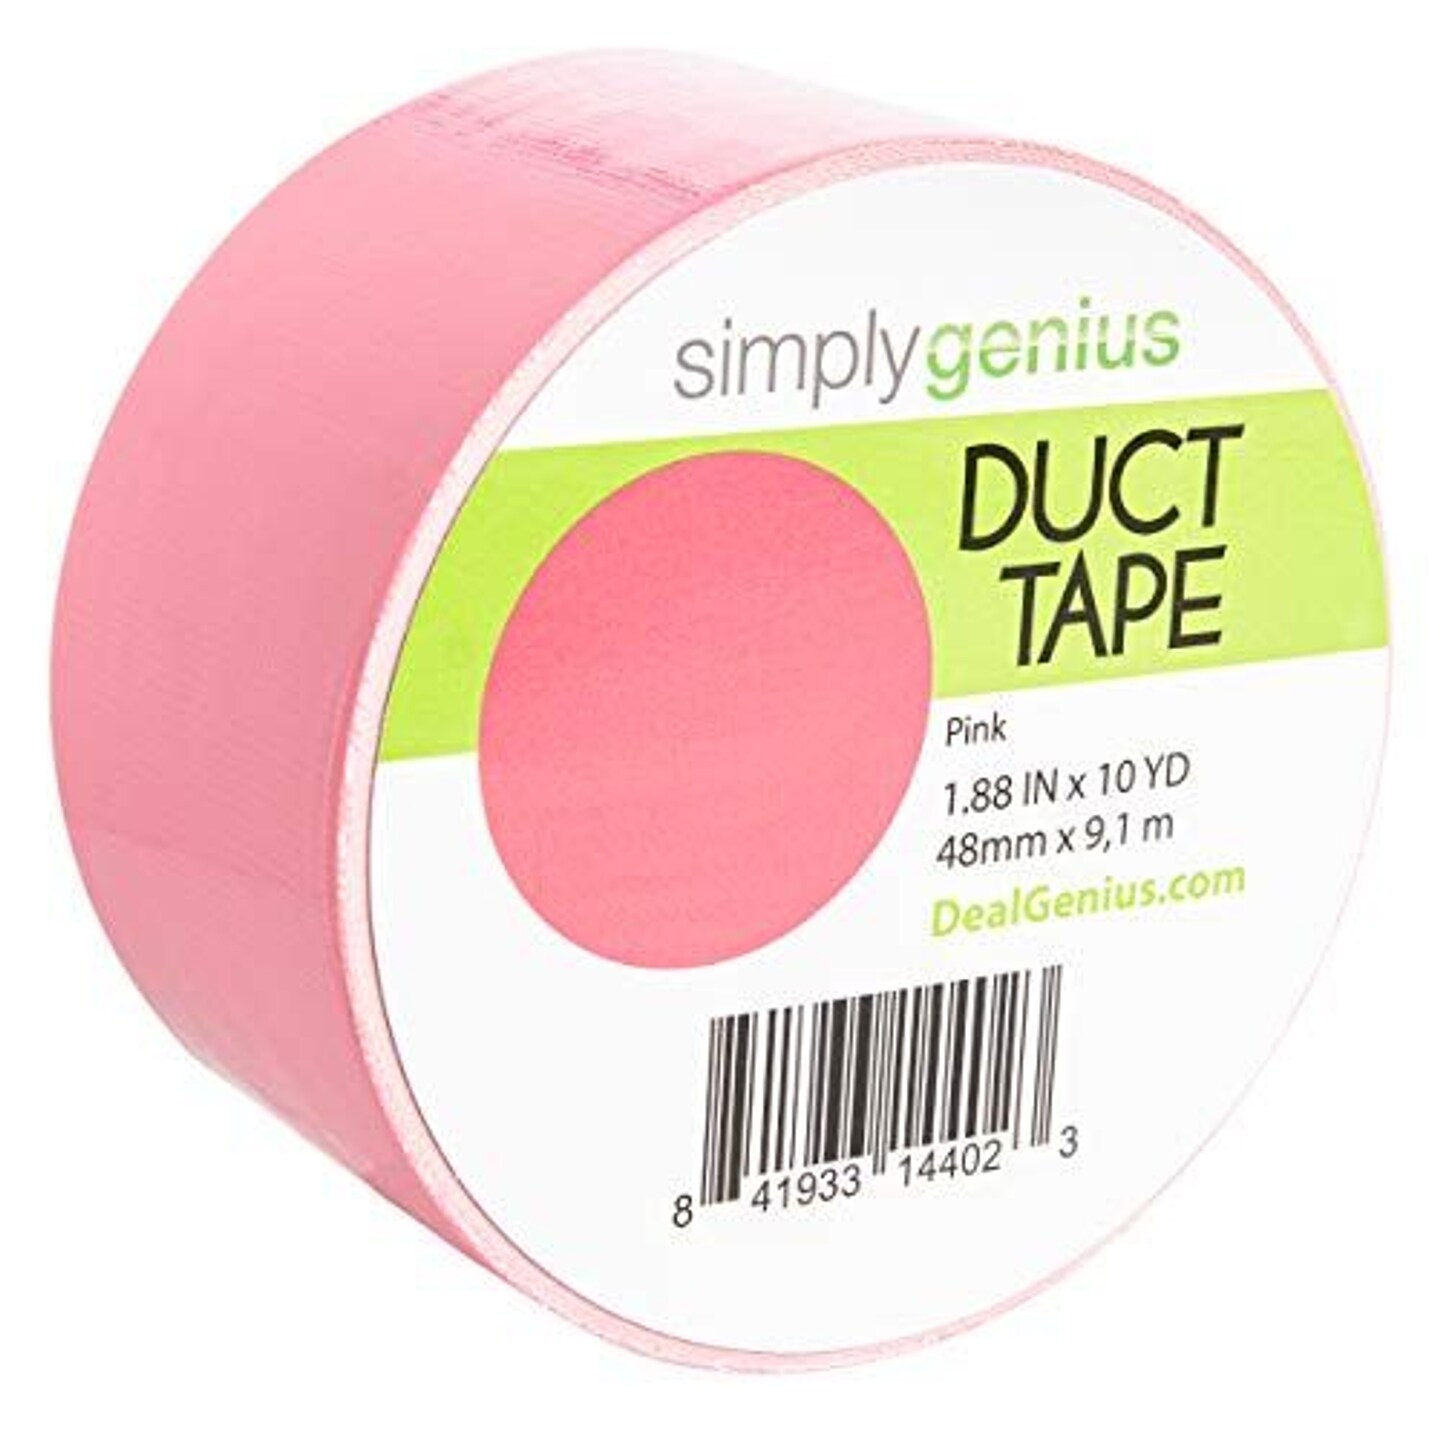 Simply Genius Art &#x26; Craft Duct Tape Heavy Duty - Craft Supplies for Adults - Colored Duct Tape - 1.8 in x 10 yards - Colorful Tape for DIY, Craft &#x26; Home Improvement (Pink, Single roll)